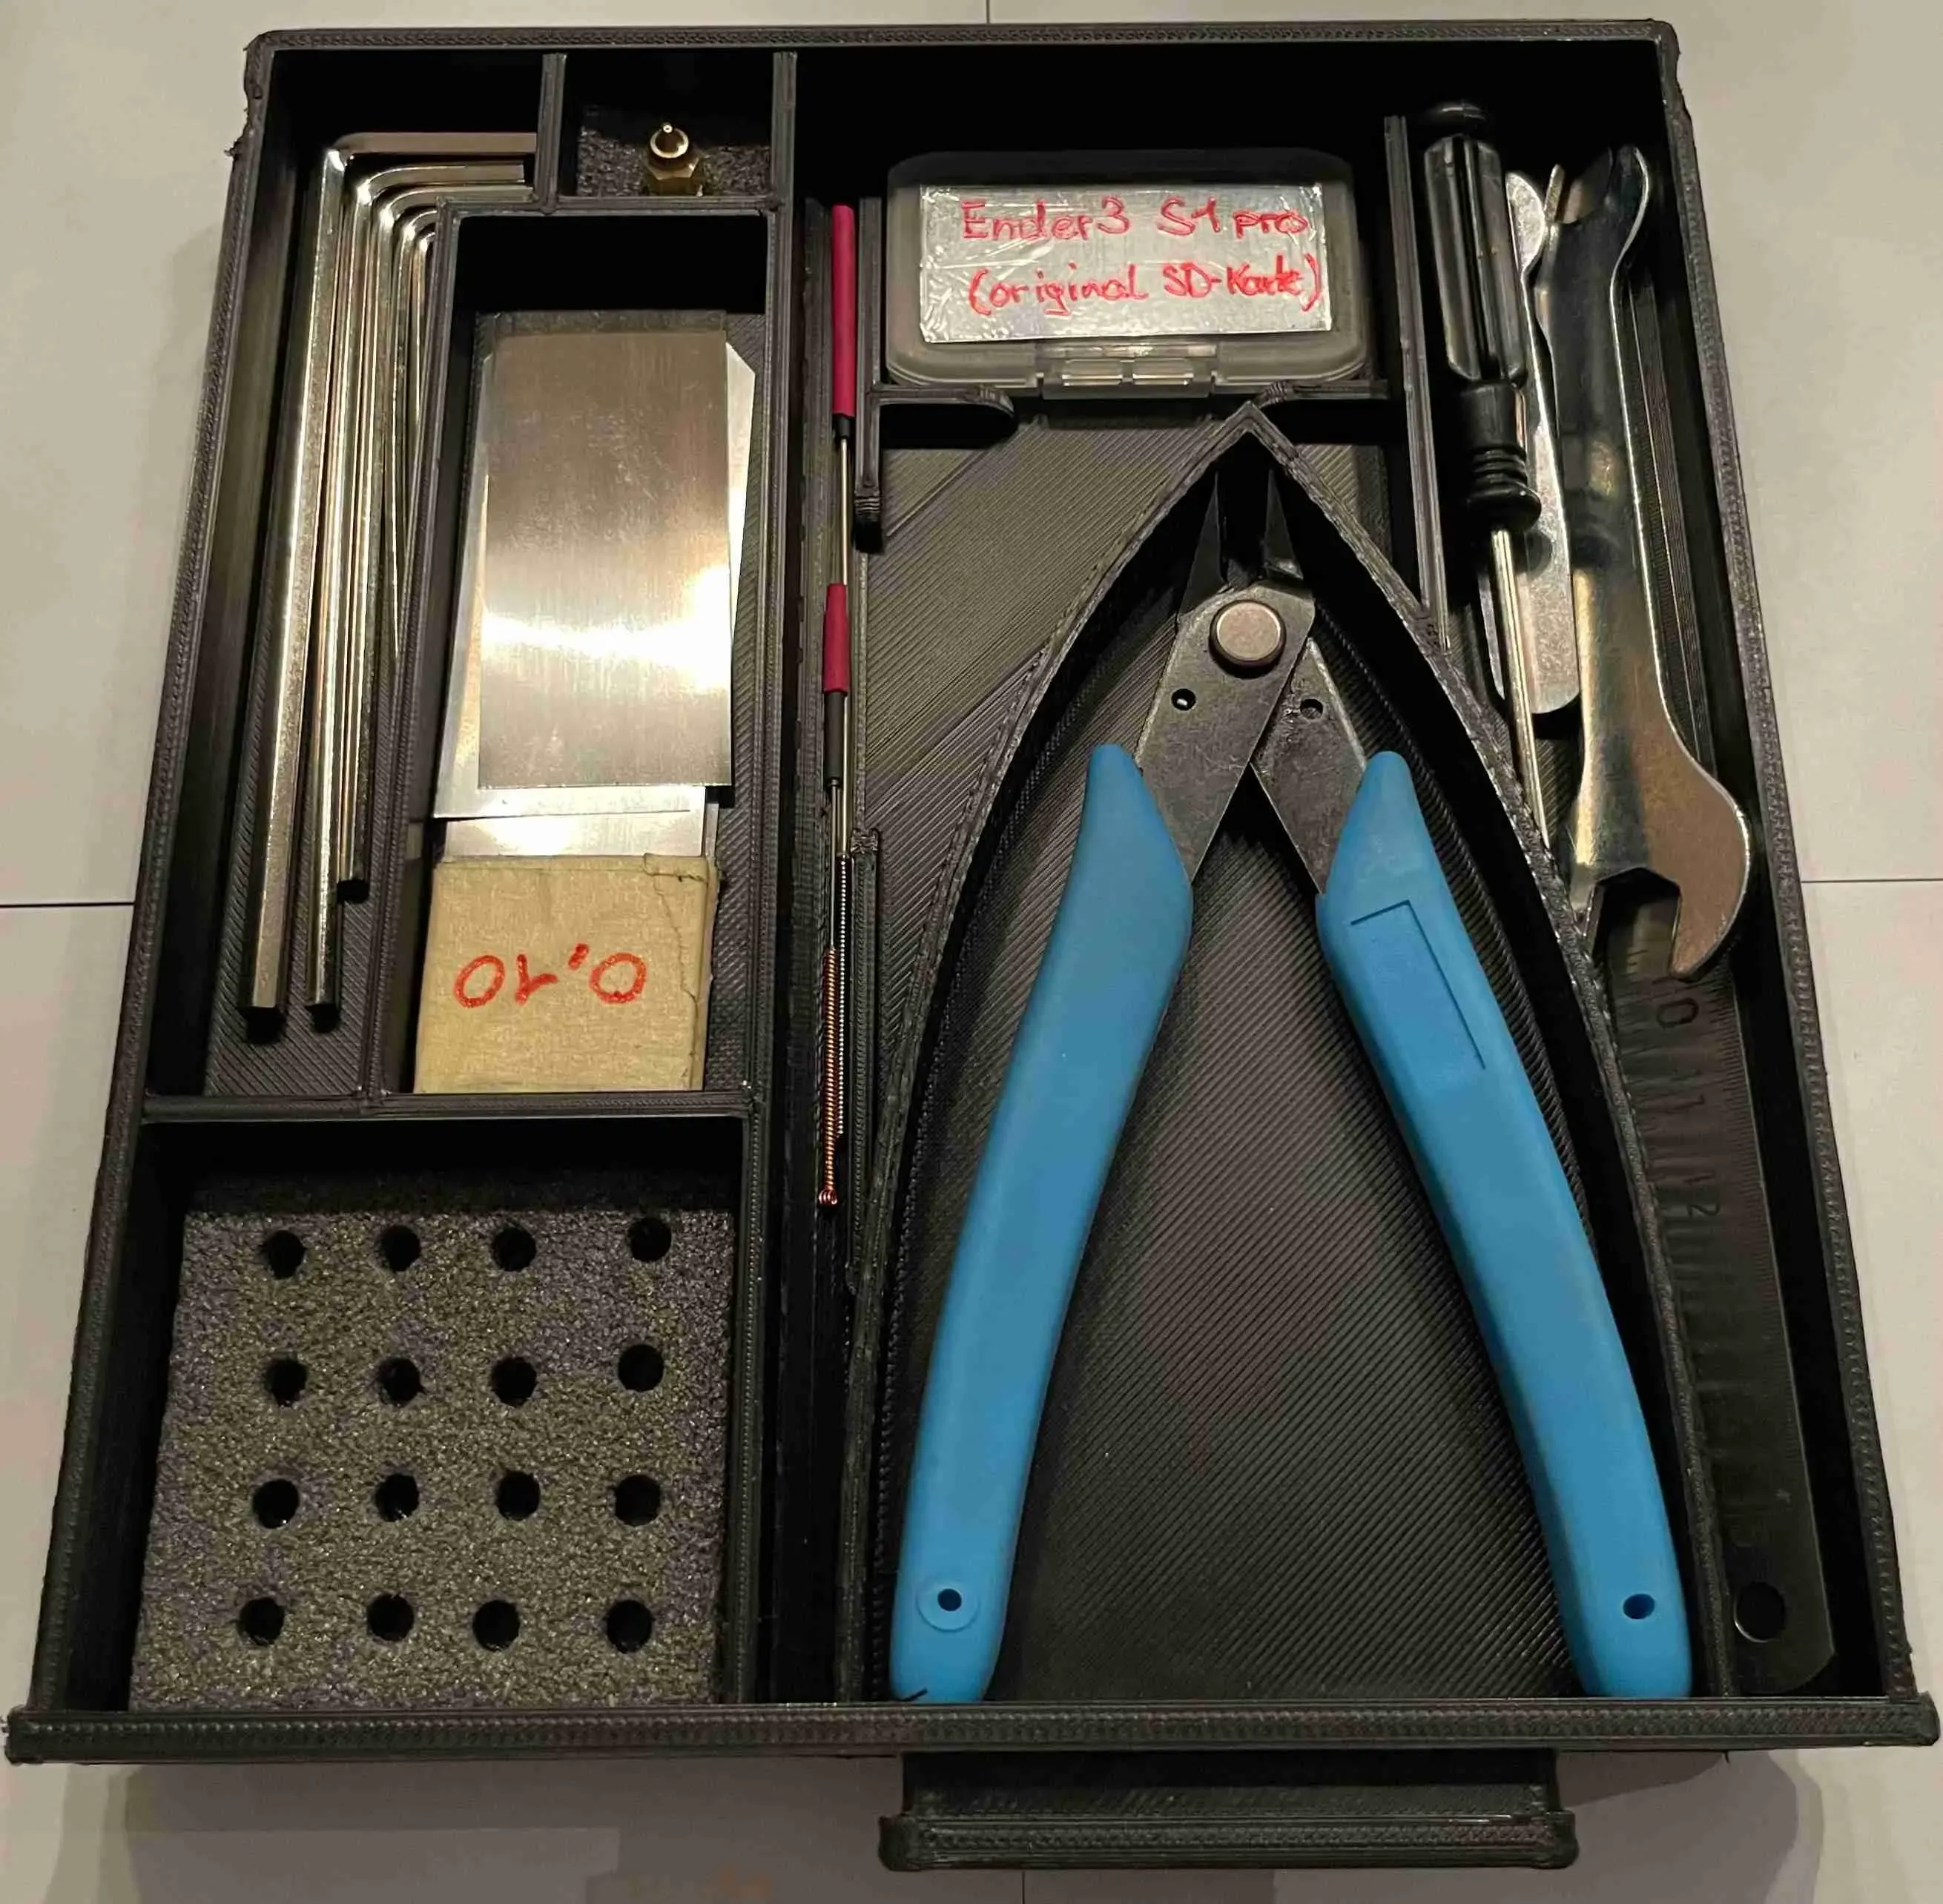 Tool drawer for Ender3 S1pro // Campaigns  -- Special-Offer